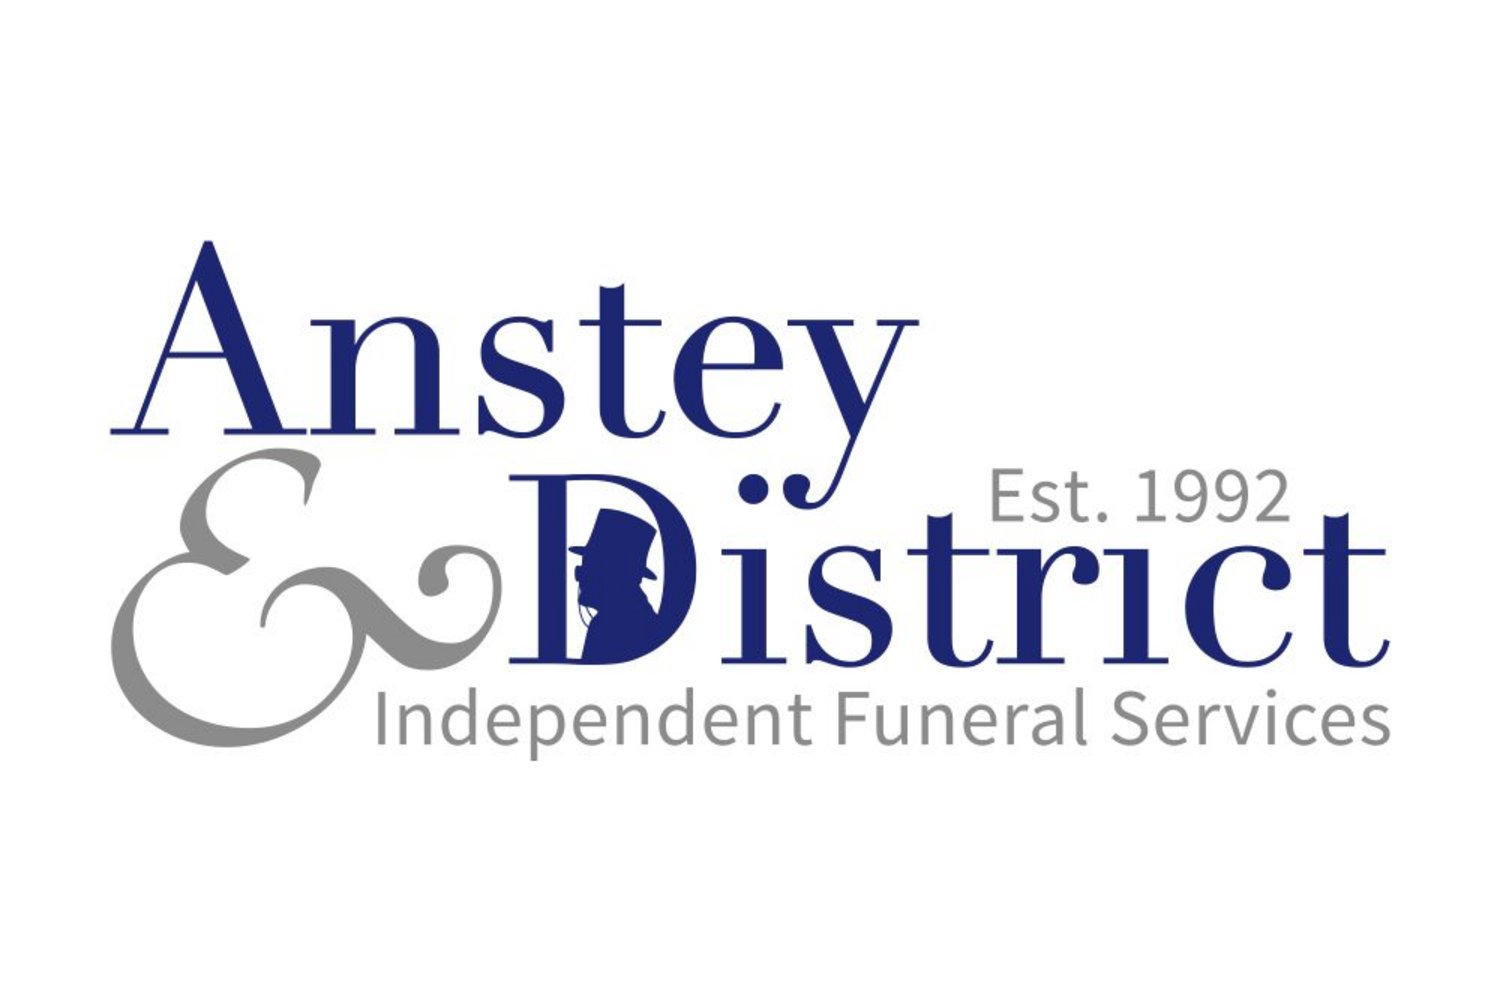 Anstey & District Funeral Services